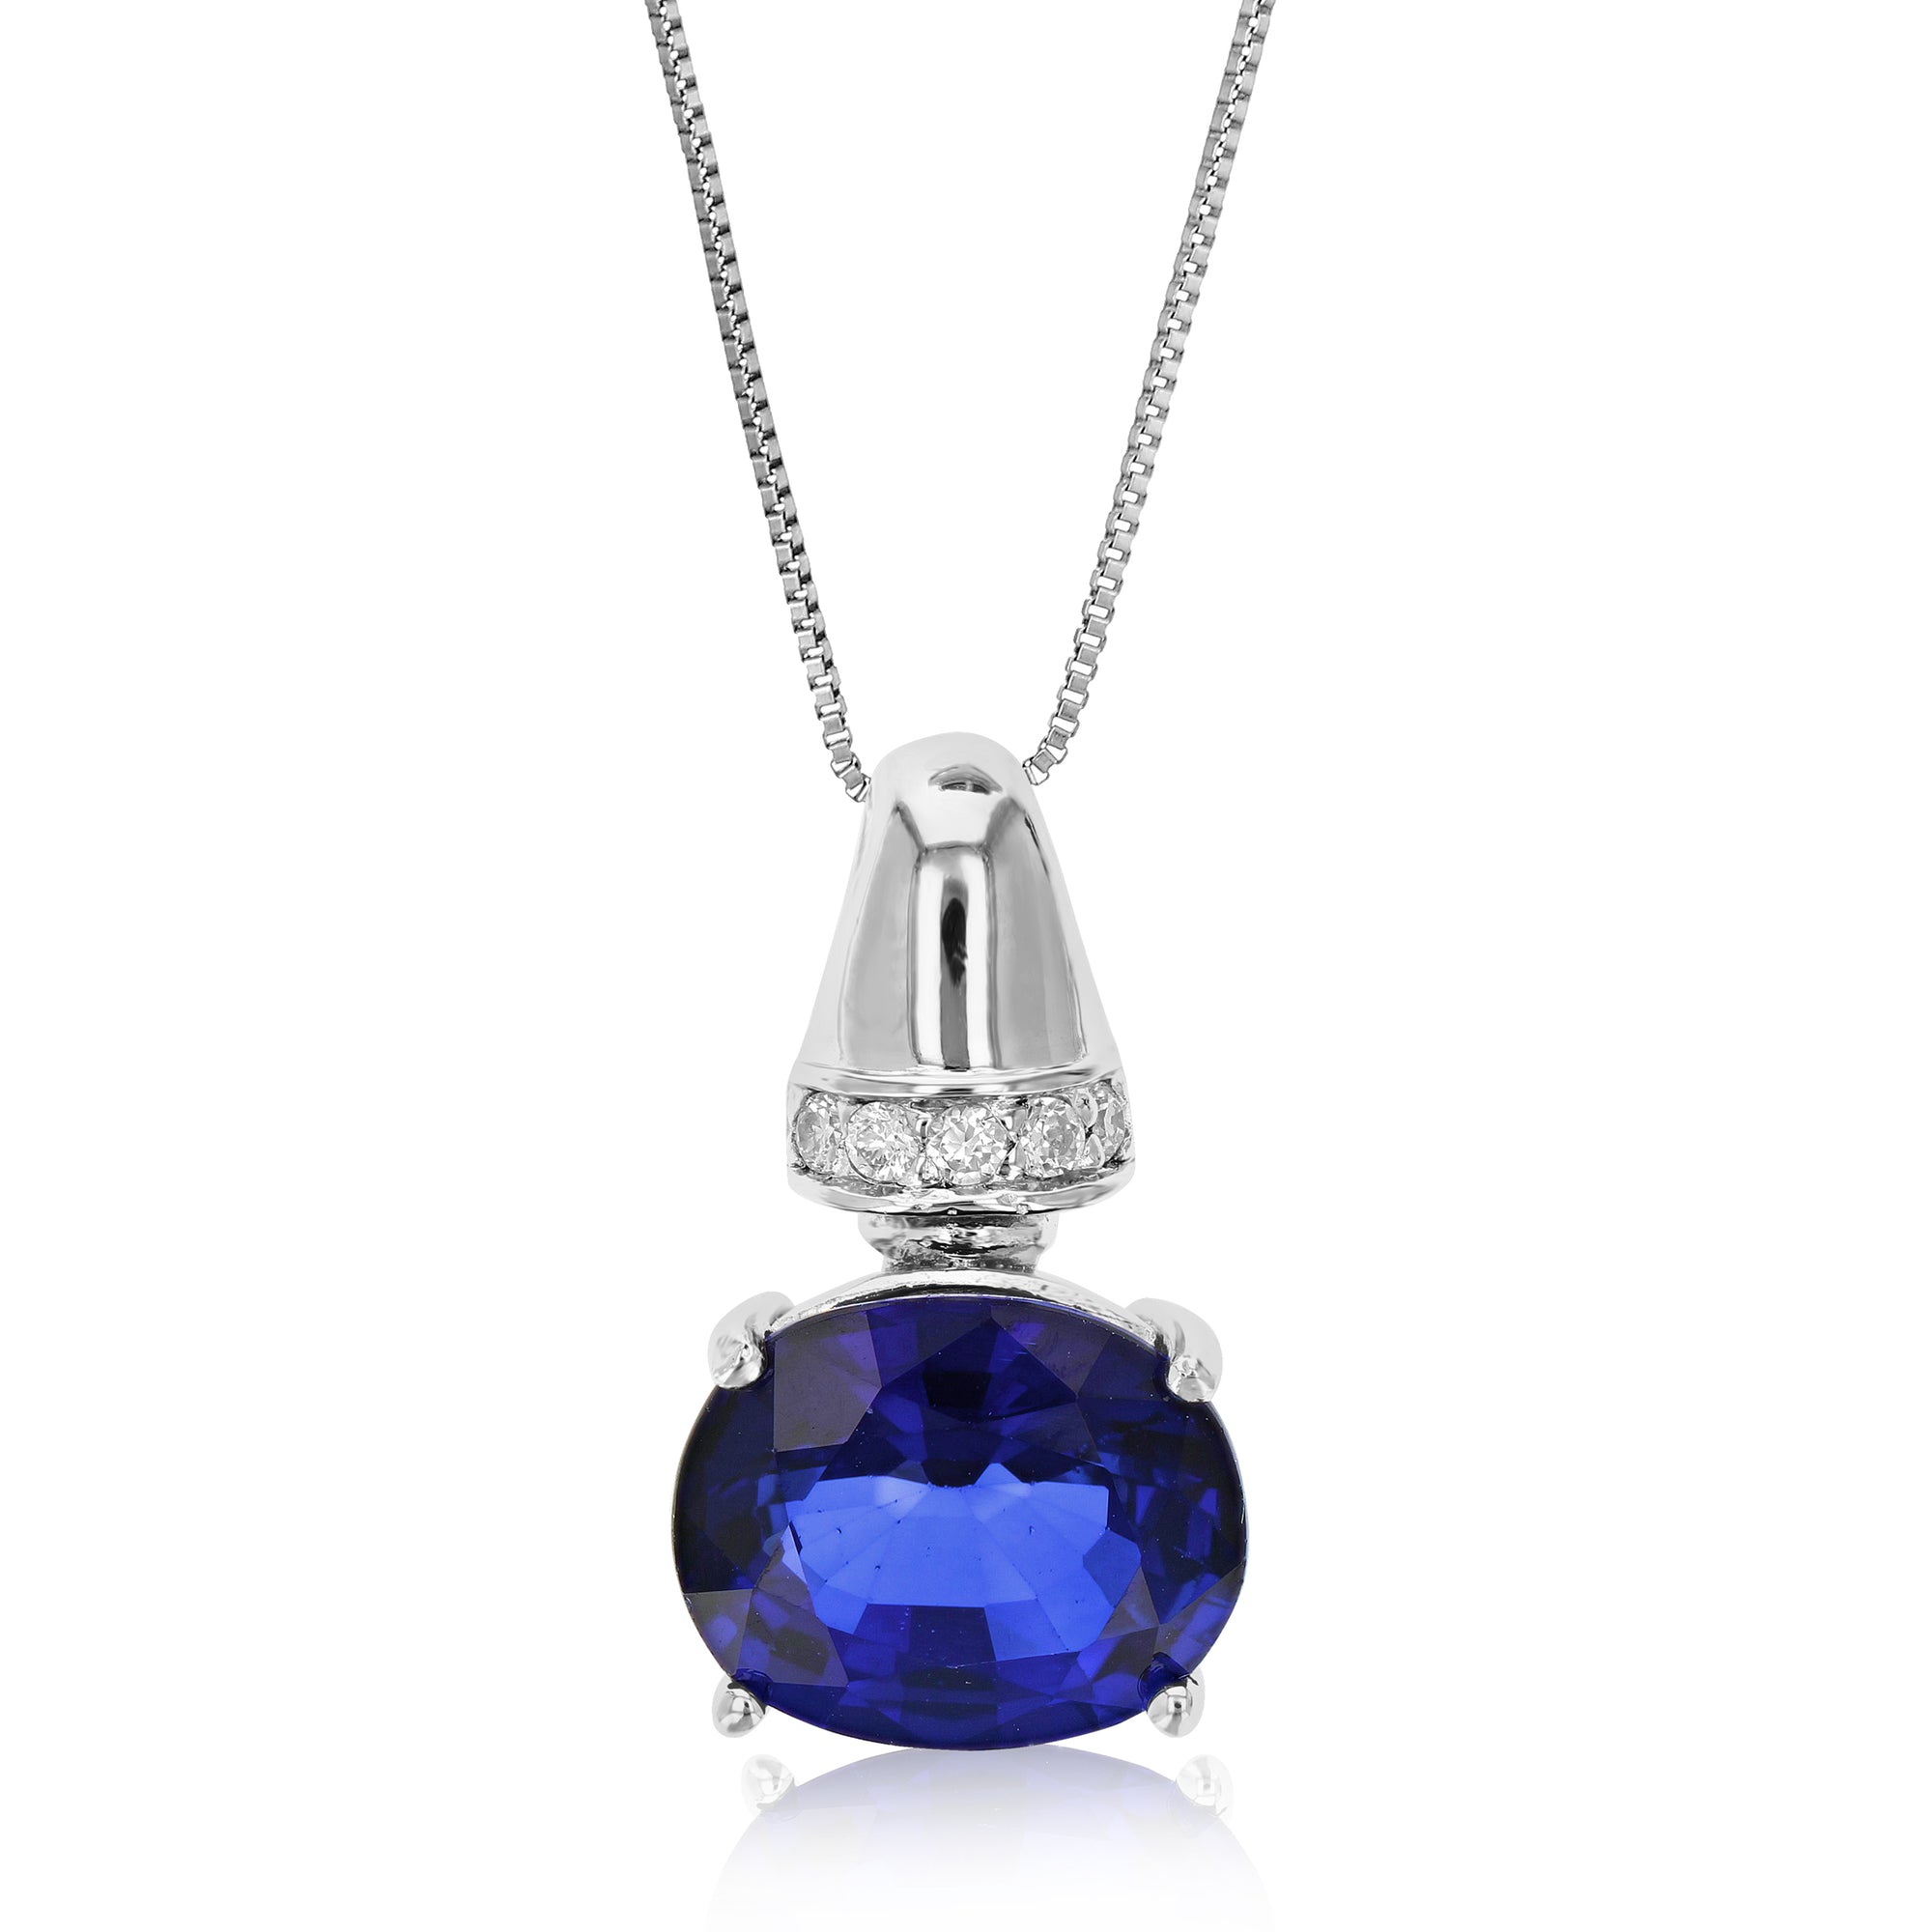 3.70 cttw Pendant Necklace, Created Blue Sapphire Oval Pendant Necklace for Women in .925 Sterling Silver with Rhodium, 18 Inch Chain, Prong Setting